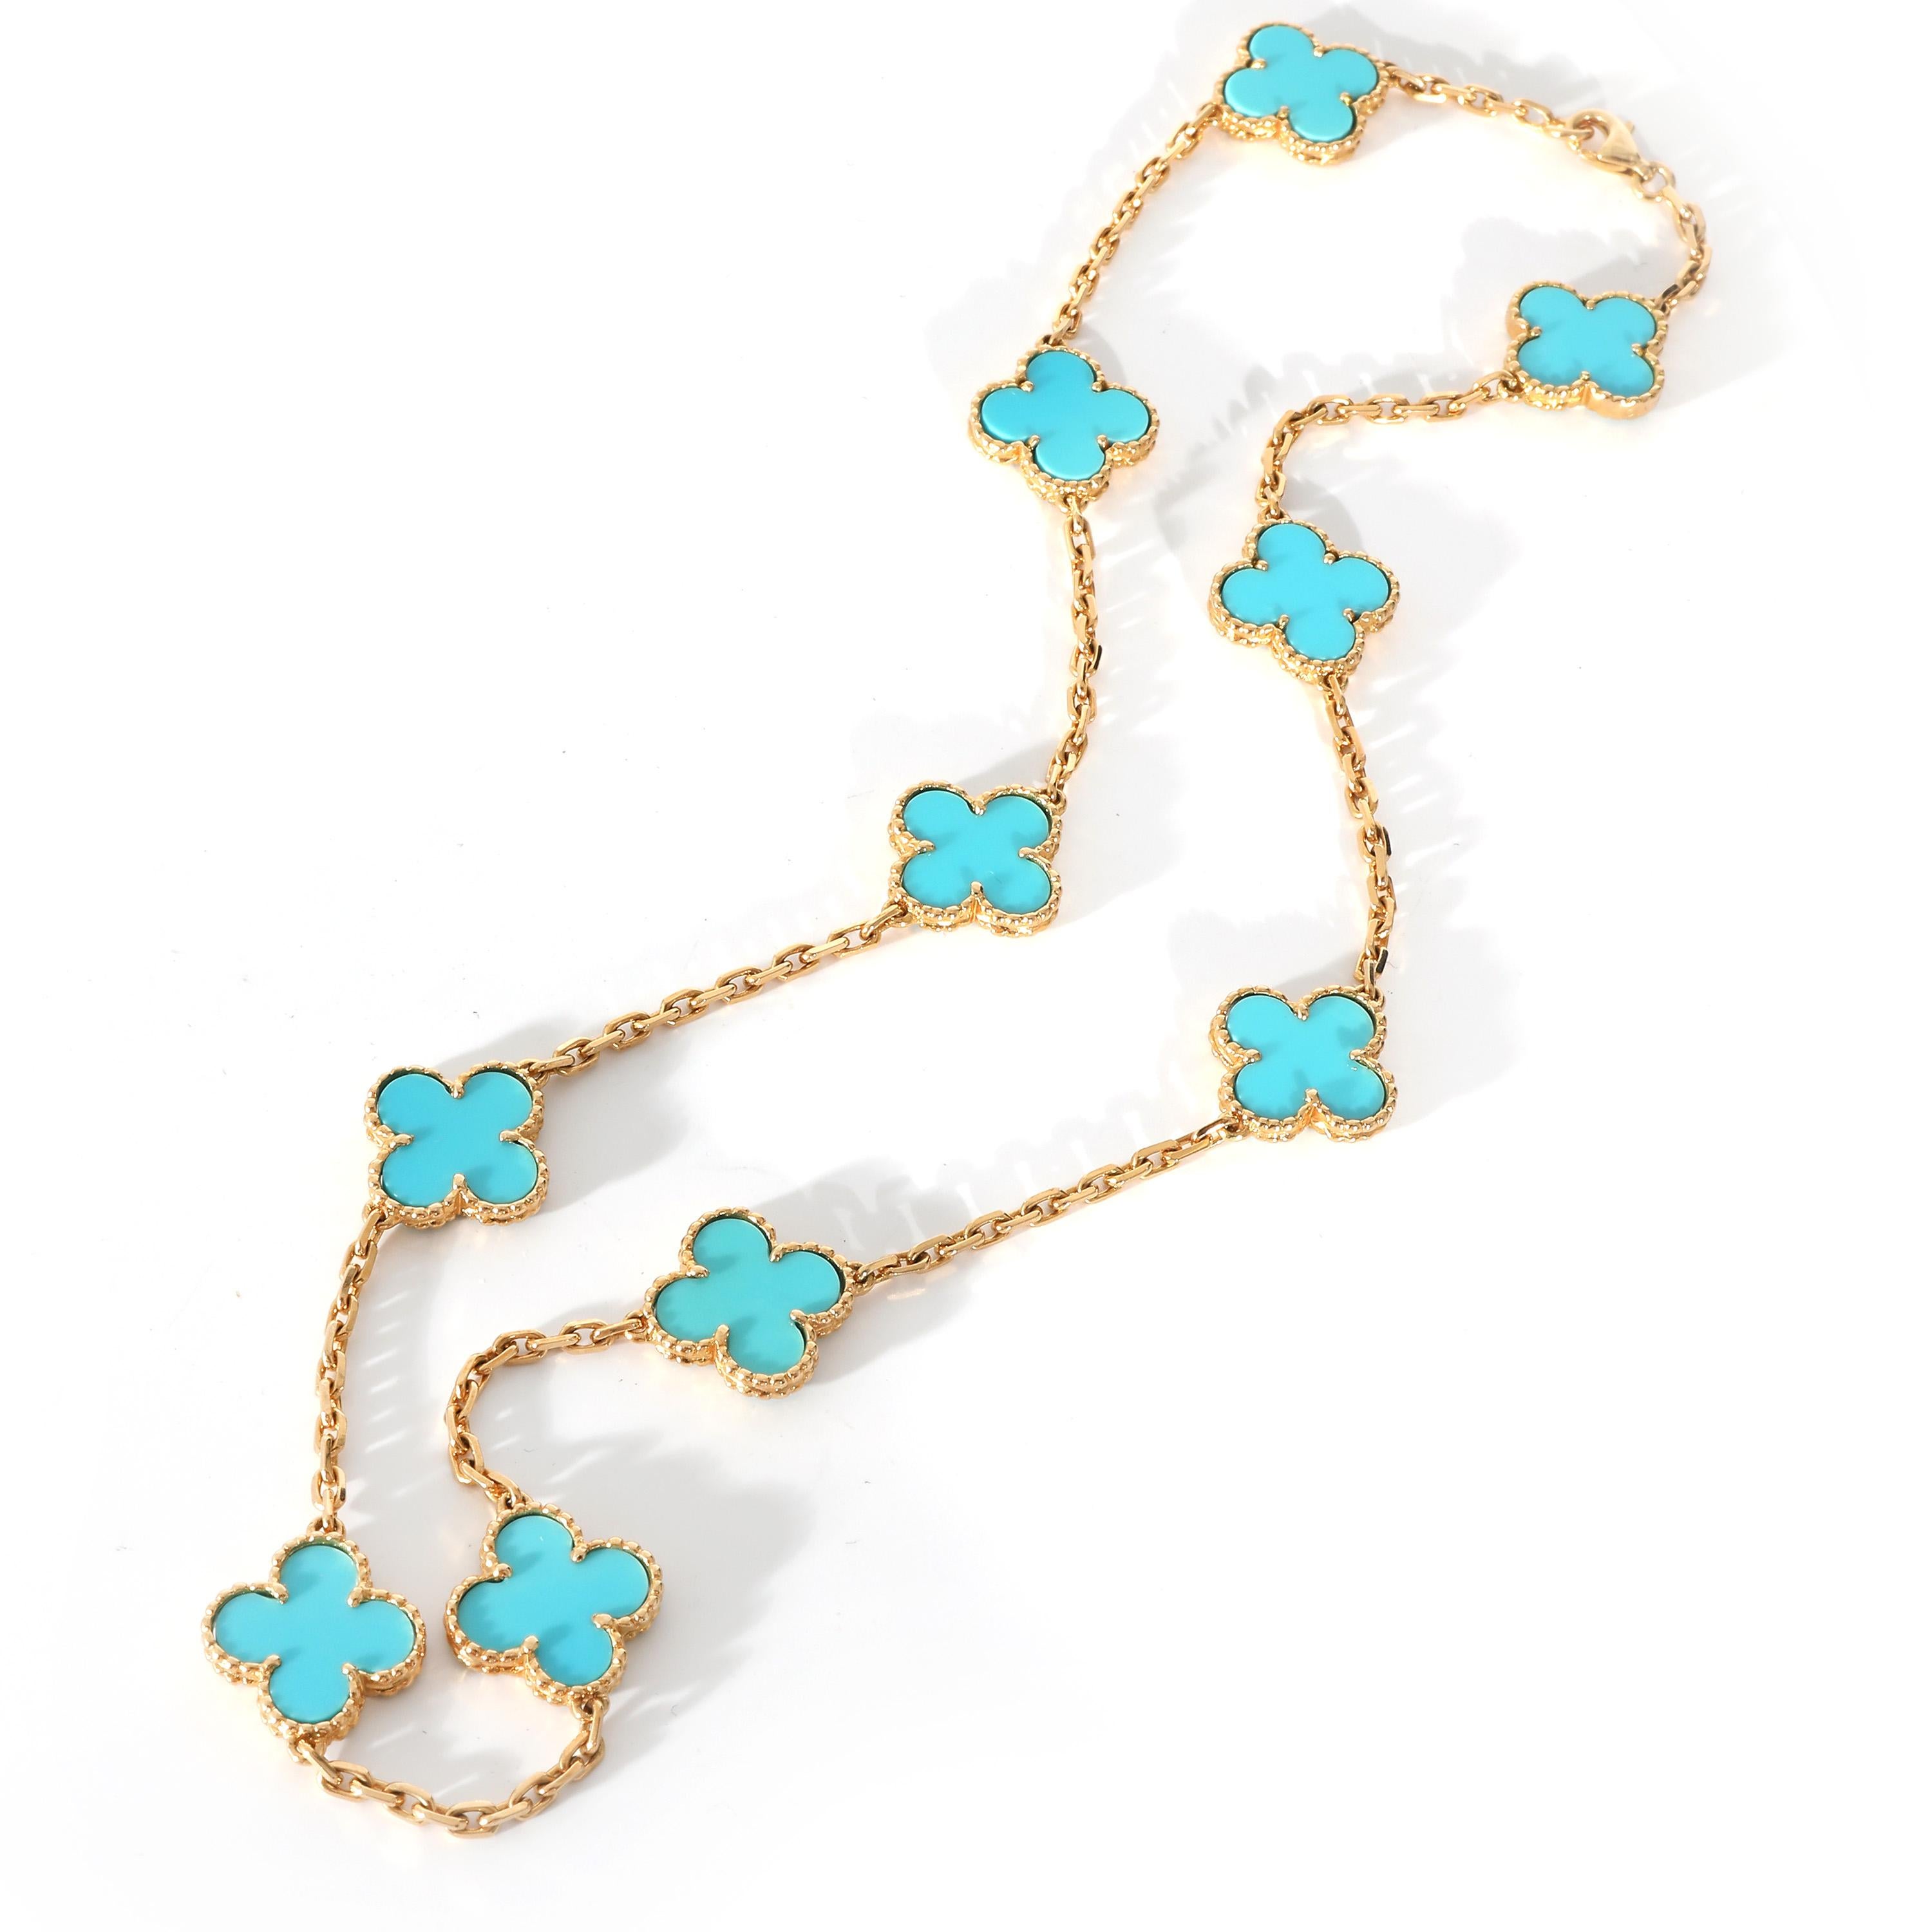 Van Cleef & Arpels Vintage Alhambra 10 Station Turquoise Necklace in 18K Gold

PRIMARY DETAILS
SKU: Z134078
Listing Title: Van Cleef & Arpels Vintage Alhambra 10 Station Turquoise Necklace in 18K Gold
Condition Description: Launched in 1968, the